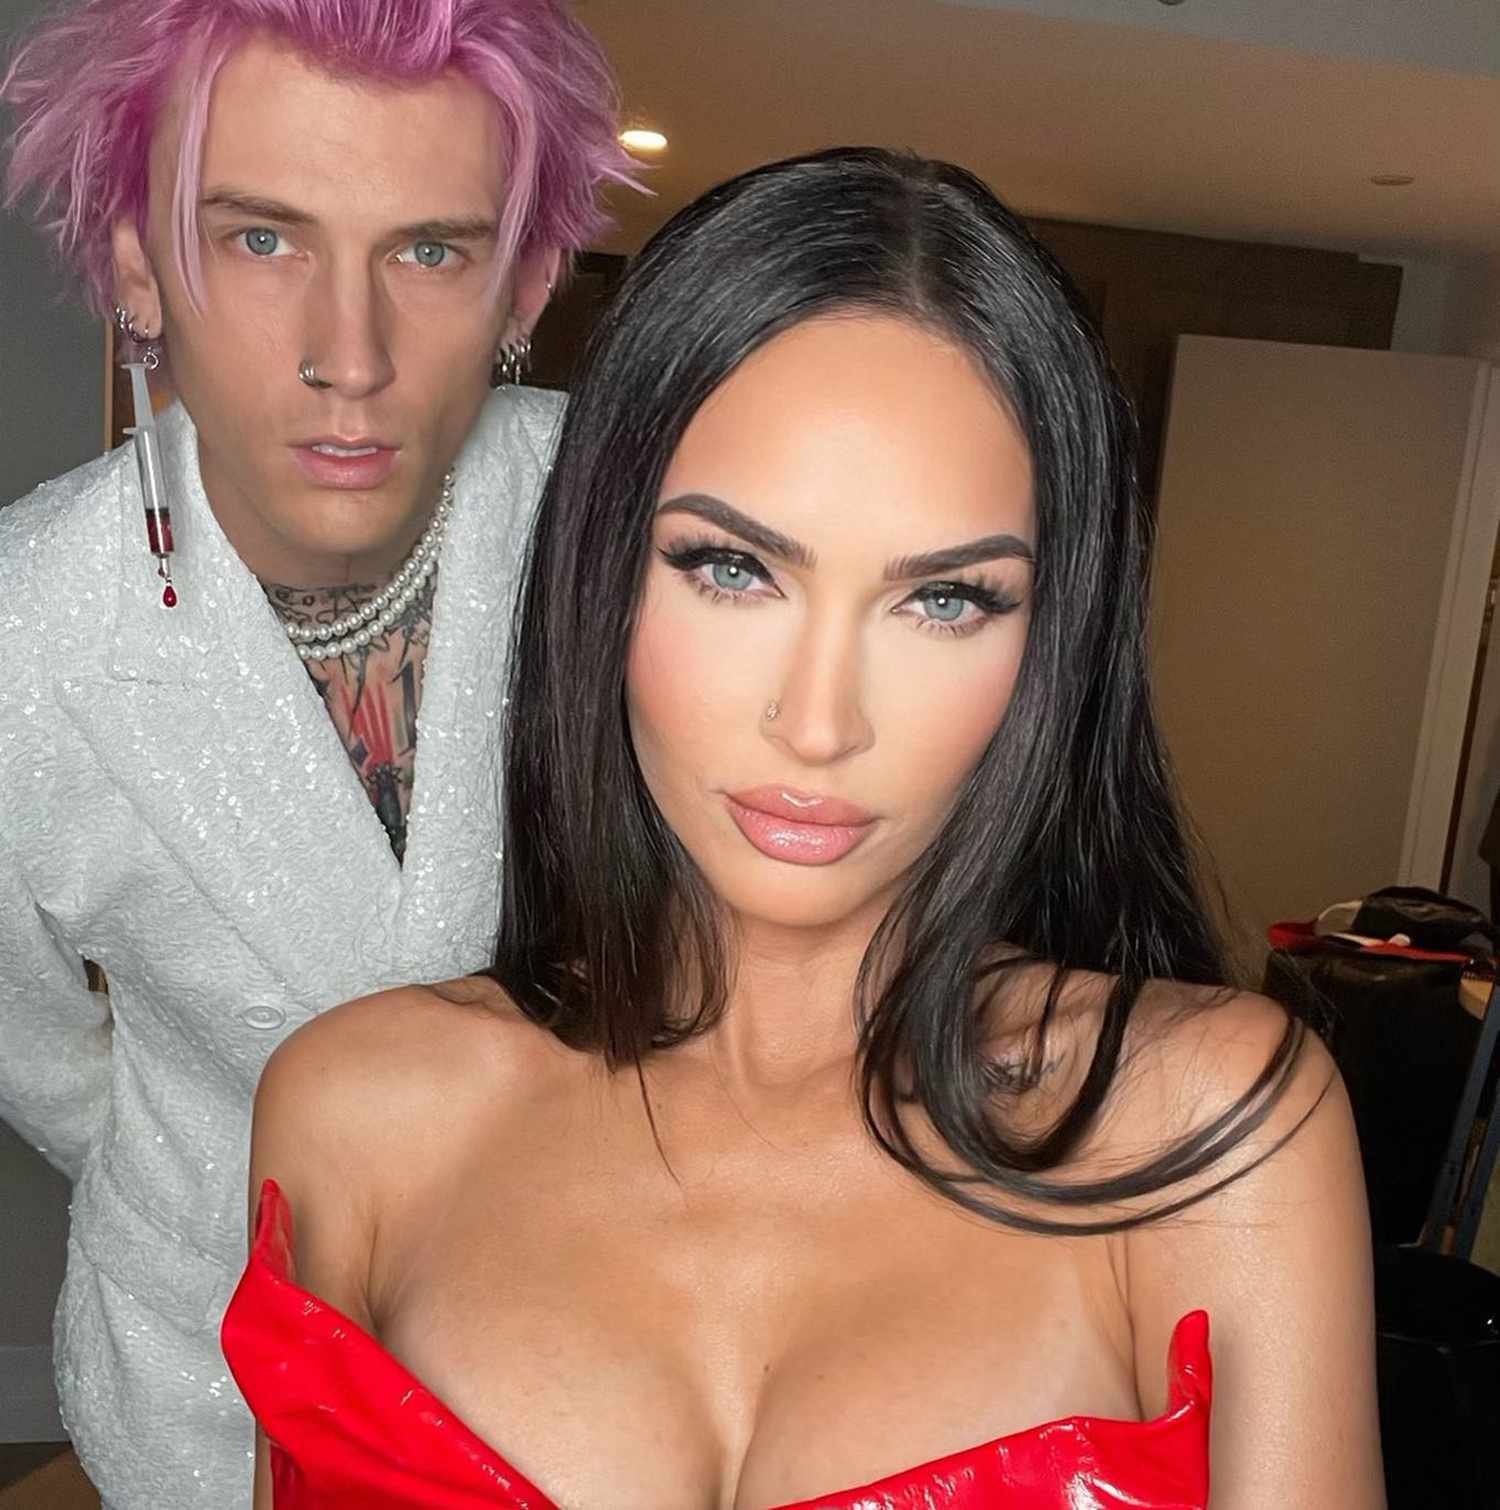 Megan Fox returns to Instagram to deny cheating caused reported split from rapper Machine Gun Kelly